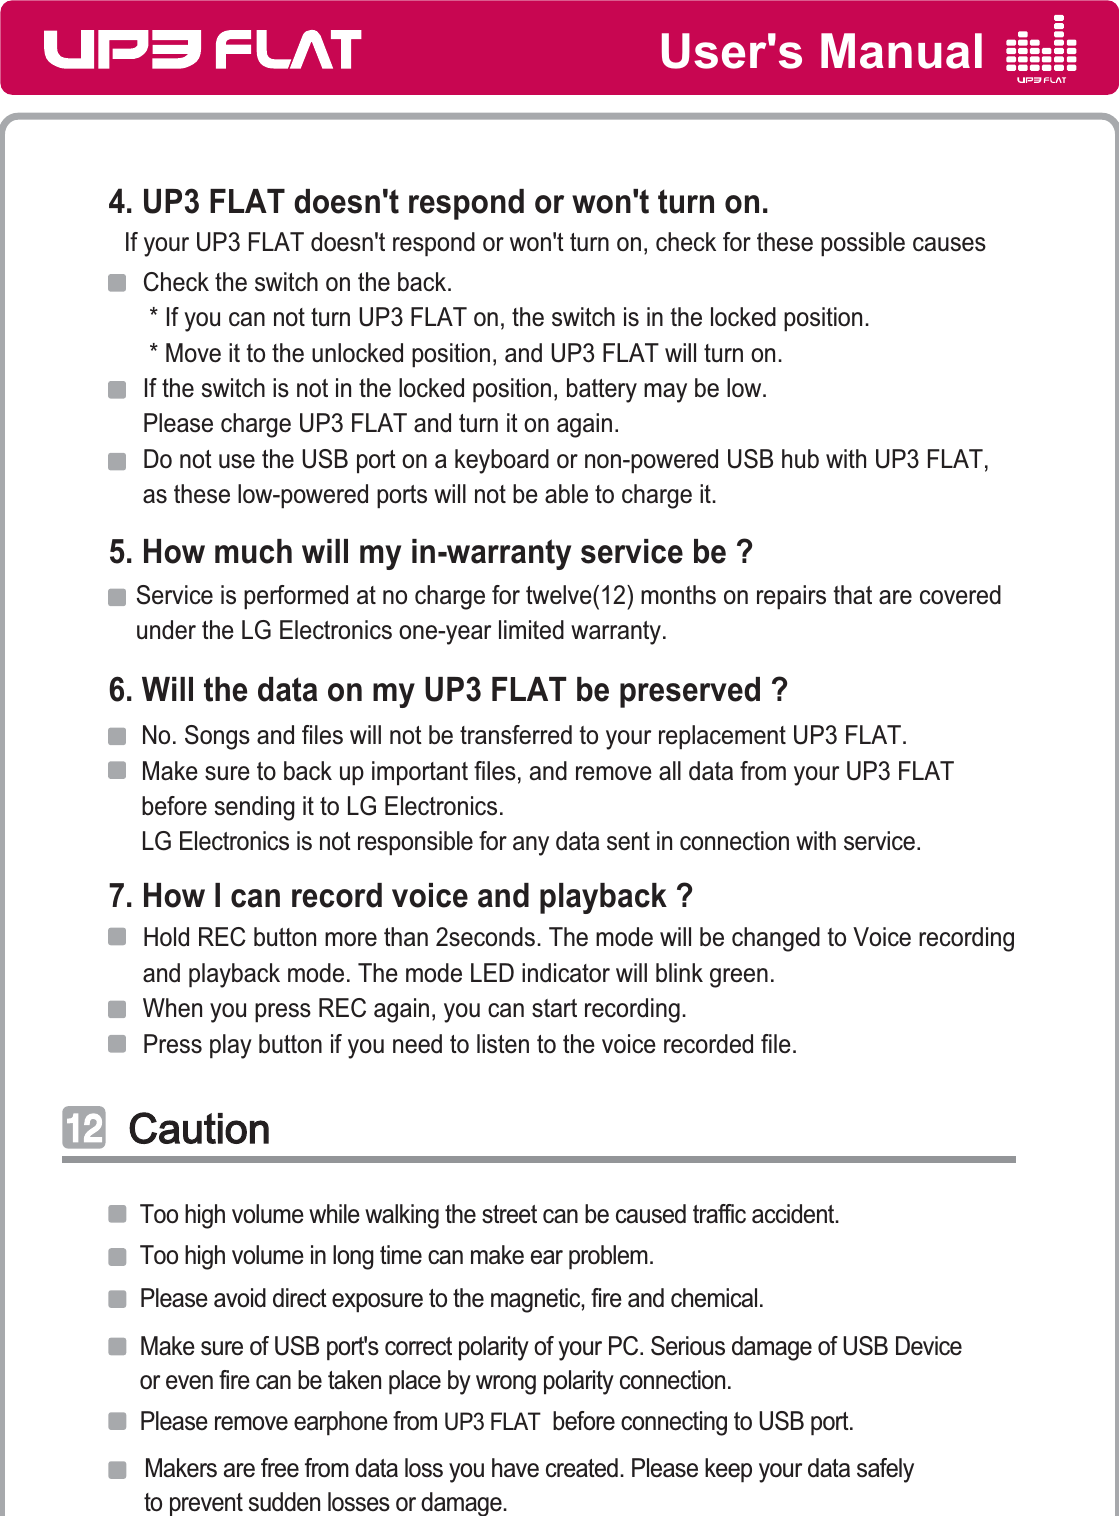 User&apos;s Manual4. UP3 FLAT doesn&apos;t respond or won&apos;t turn on.5. How much will my in-warranty service be ?6. Will the data on my UP3 FLAT be preserved ?7. How I can record voice and playback ?Check the switch on the back.  * If you can not turn UP3 FLAT on, the switch is in the locked position.  * Move it to the unlocked position, and UP3 FLAT will turn on.If the switch is not in the locked position, battery may be low. Please charge UP3 FLAT and turn it on again.Do not use the USB port on a keyboard or non-powered USB hub with UP3 FLAT,as these low-powered ports will not be able to charge it.If your UP3 FLAT doesn&apos;t respond or won&apos;t turn on, check for these possible causesService is performed at no charge for twelve(12) months on repairs that are covered under the LG Electronics one-year limited warranty.No. Songs and files will not be transferred to your replacement UP3 FLAT. Make sure to back up important files, and remove all data from your UP3 FLATbefore sending it to LG Electronics. LG Electronics is not responsible for any data sent in connection with service. Hold REC button more than 2seconds. The mode will be changed to Voice recording and playback mode. The mode LED indicator will blink green.When you press REC again, you can start recording.Press play button if you need to listen to the voice recorded file.CautionCautionͣͣ͢͢Too high volume while walking the street can be caused traffic accident.Too high volume in long time can make ear problem.Please avoid direct exposure to the magnetic, fire and chemical.Make sure of USB port&apos;s correct polarity of your PC. Serious damage of USB Deviceor even fire can be taken place by wrong polarity connection. Please remove earphone from UP3 FLAT  before connecting to USB port. Makers are free from data loss you have created. Please keep your data safelyto prevent sudden losses or damage.